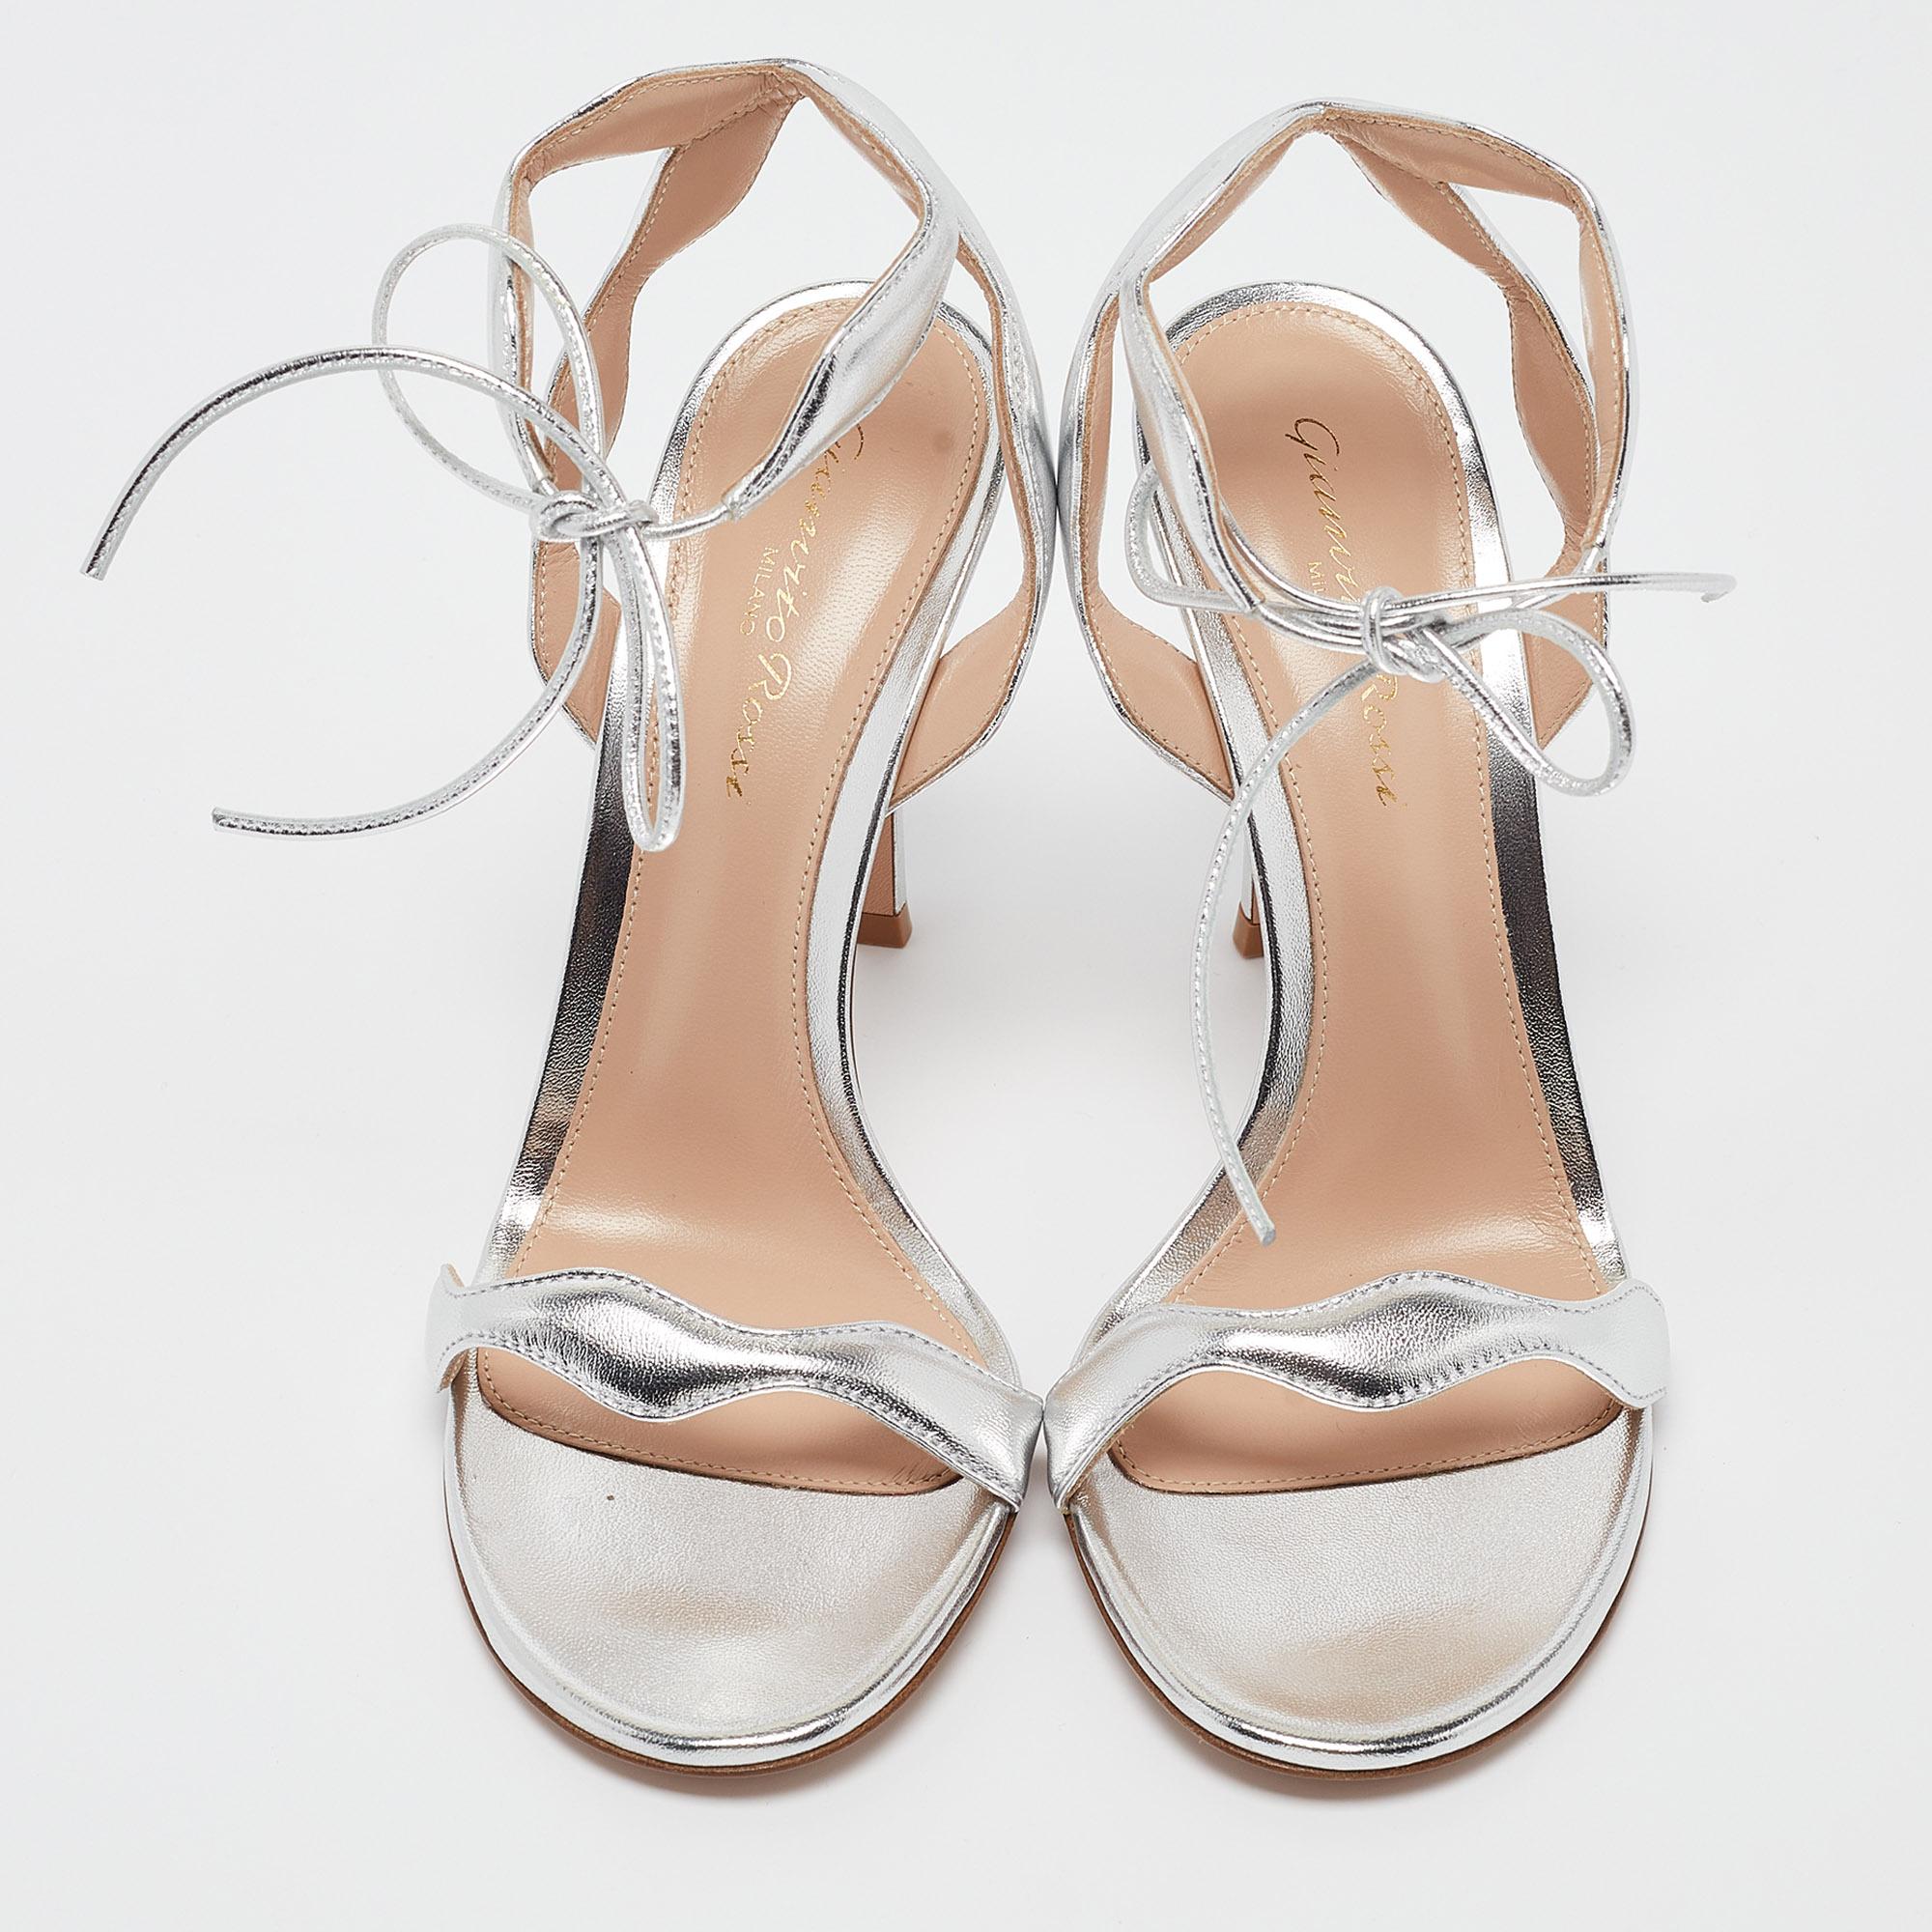 Crafted by Gianvito Rossi, these Wavy sandals redefine chic. The metallic hue shimmers effortlessly, while the wavy design adds a touch of whimsy. The ankle tie detail exudes charm and ensures a customizable fit. Perfect for adding a dash of glamour